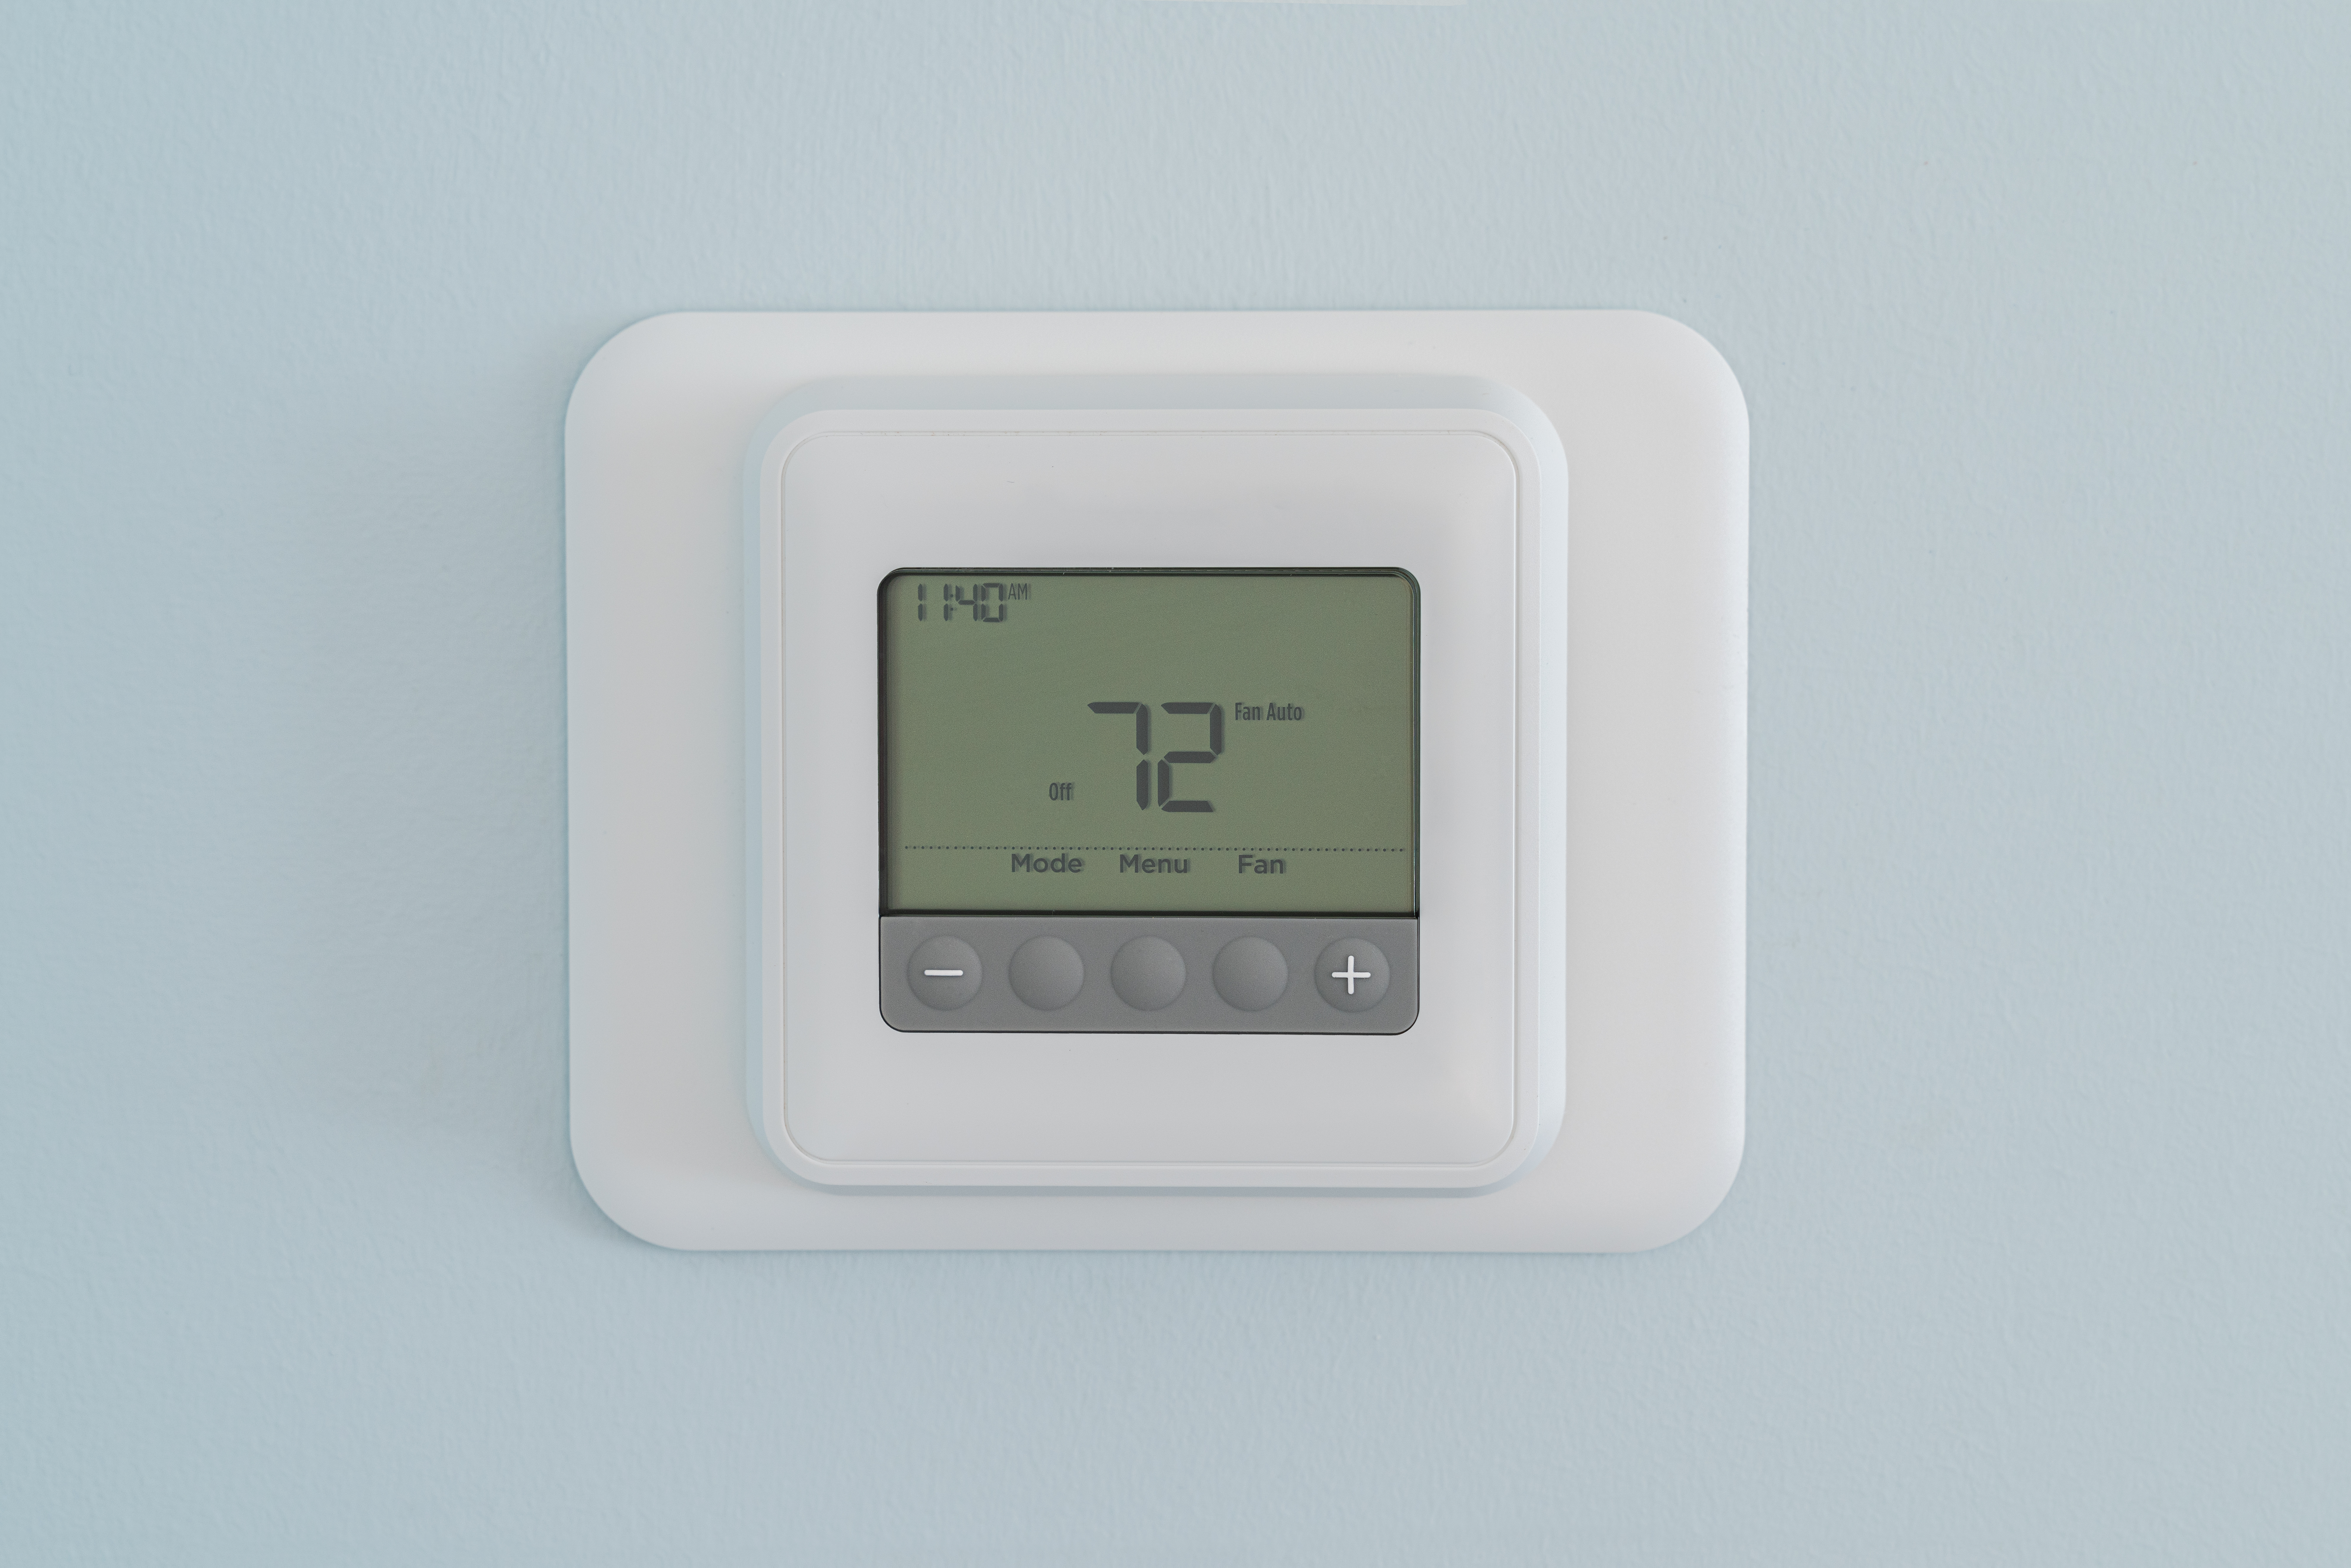 5 Reasons Why You Should Buy a Smart Thermostat